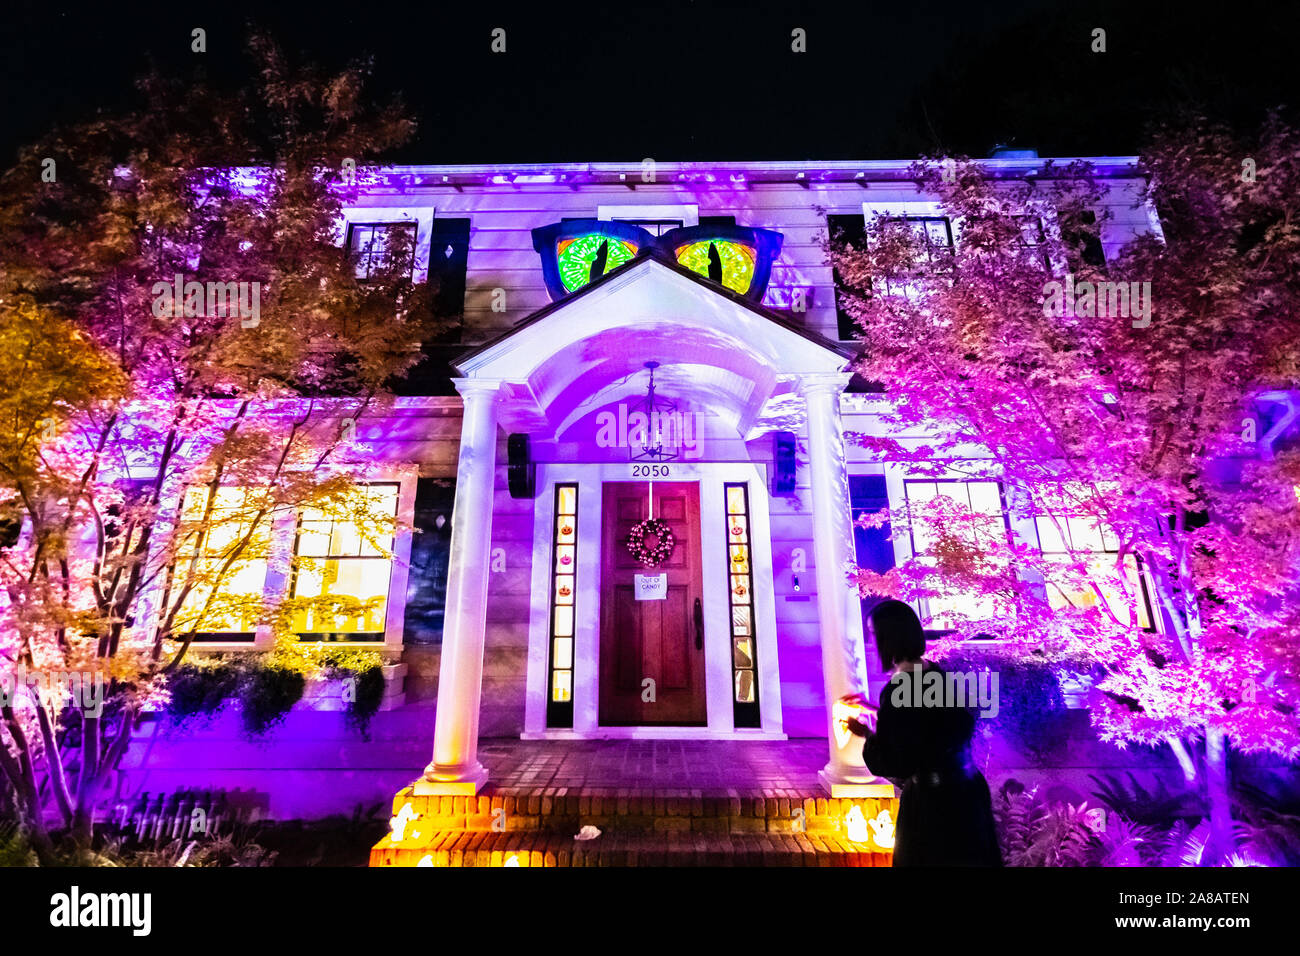 Oct 31, 2019 Palo Alto / CA / USA - Halloween in one of the Silicon Valley's upscale neighborhoods; Stock Photo